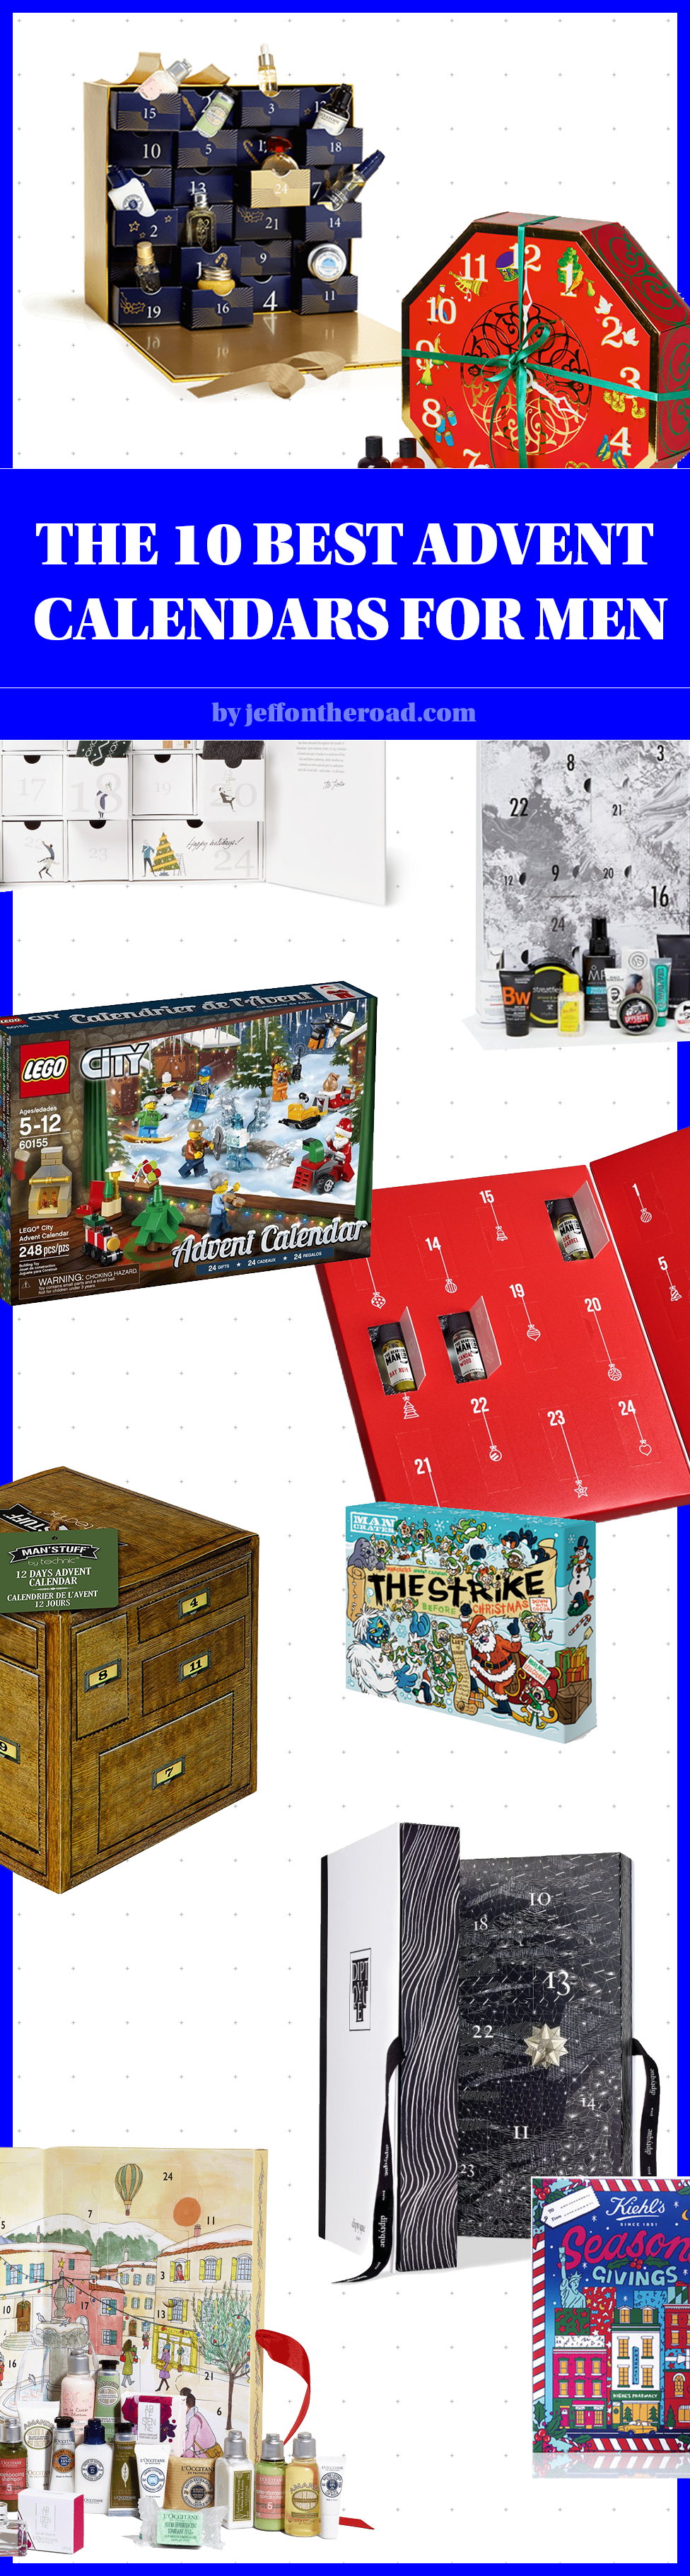 Jeff On The Road - Holidays - Gifts - The 10 Best Advent Calendars For Men